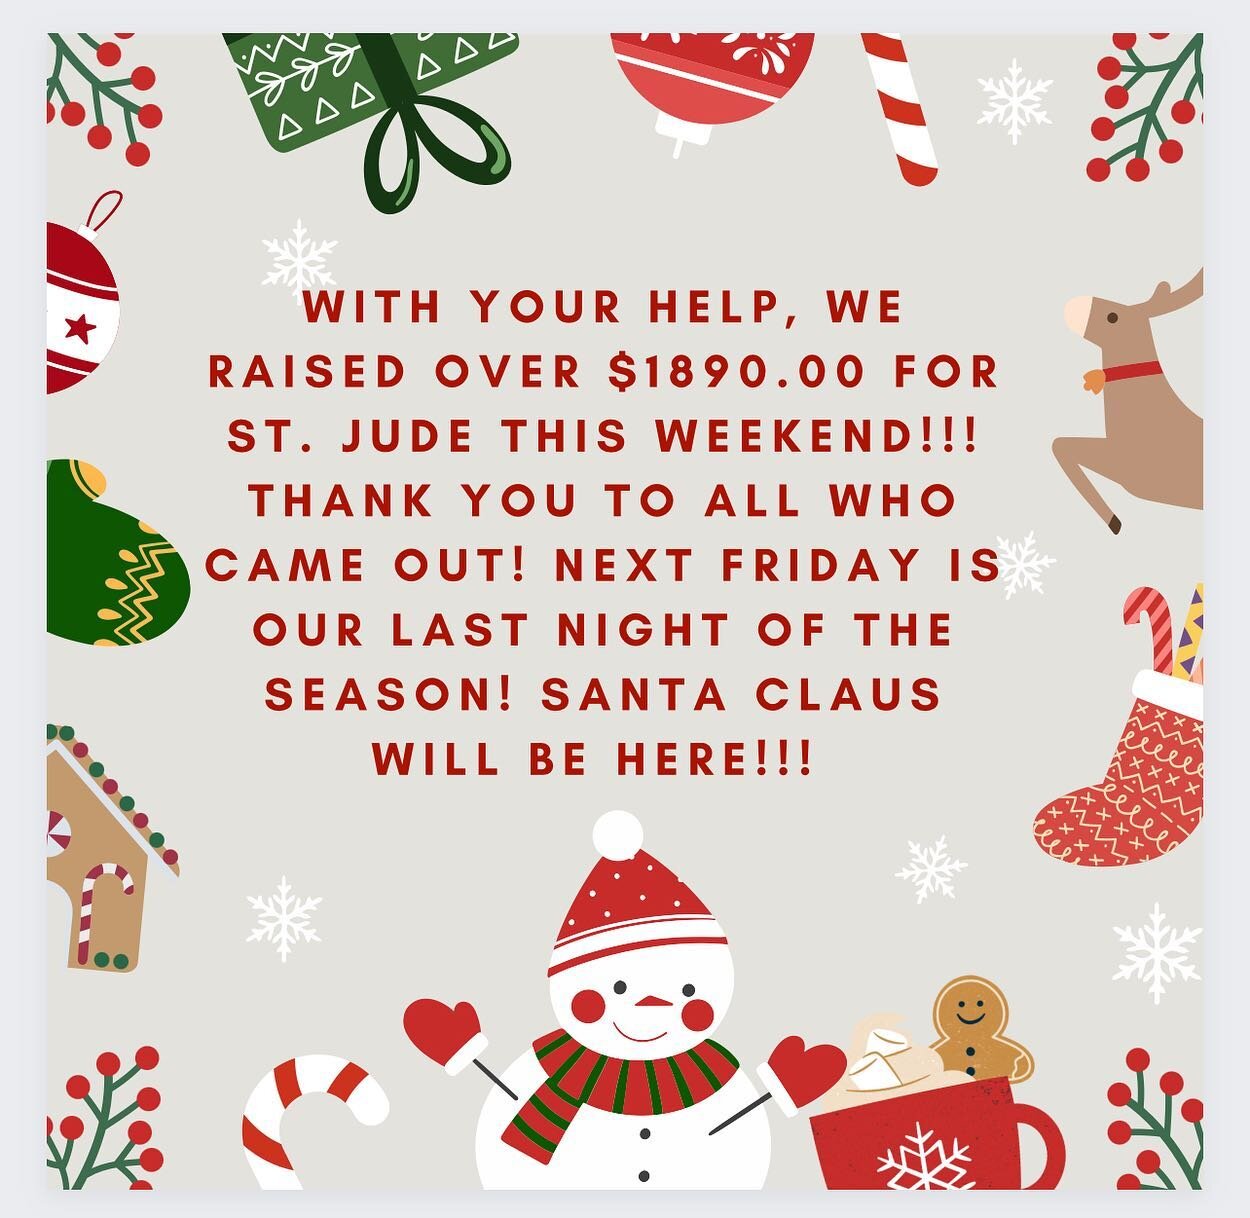 Such a wonderful weekend!!! 
We hope to see you next Friday for our last night of the 2023 season!! Santa Claus will be here from 5-7pm Friday, Dec. 22nd!! Come by and grab a cup of hot cocoa and a chocolate chip cookie!! Complimentary of course!! Se